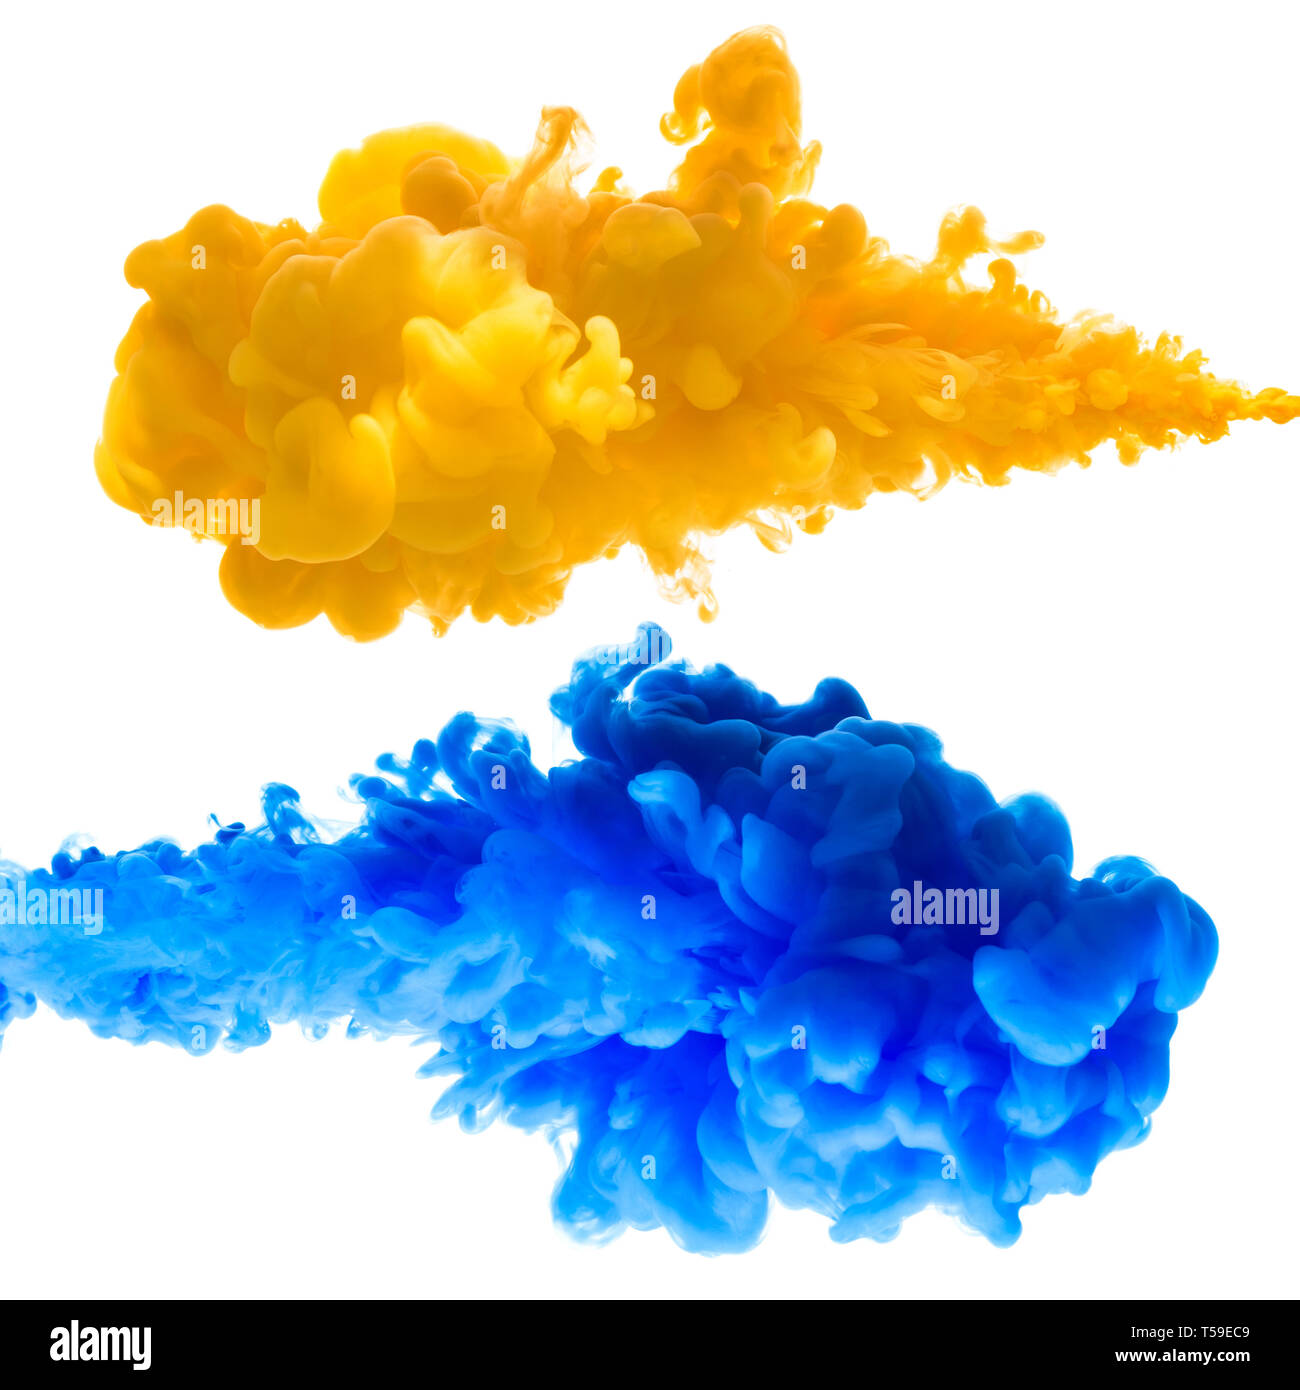 Orange and blue ink splashes in the water, isolated on white background  Stock Photo - Alamy